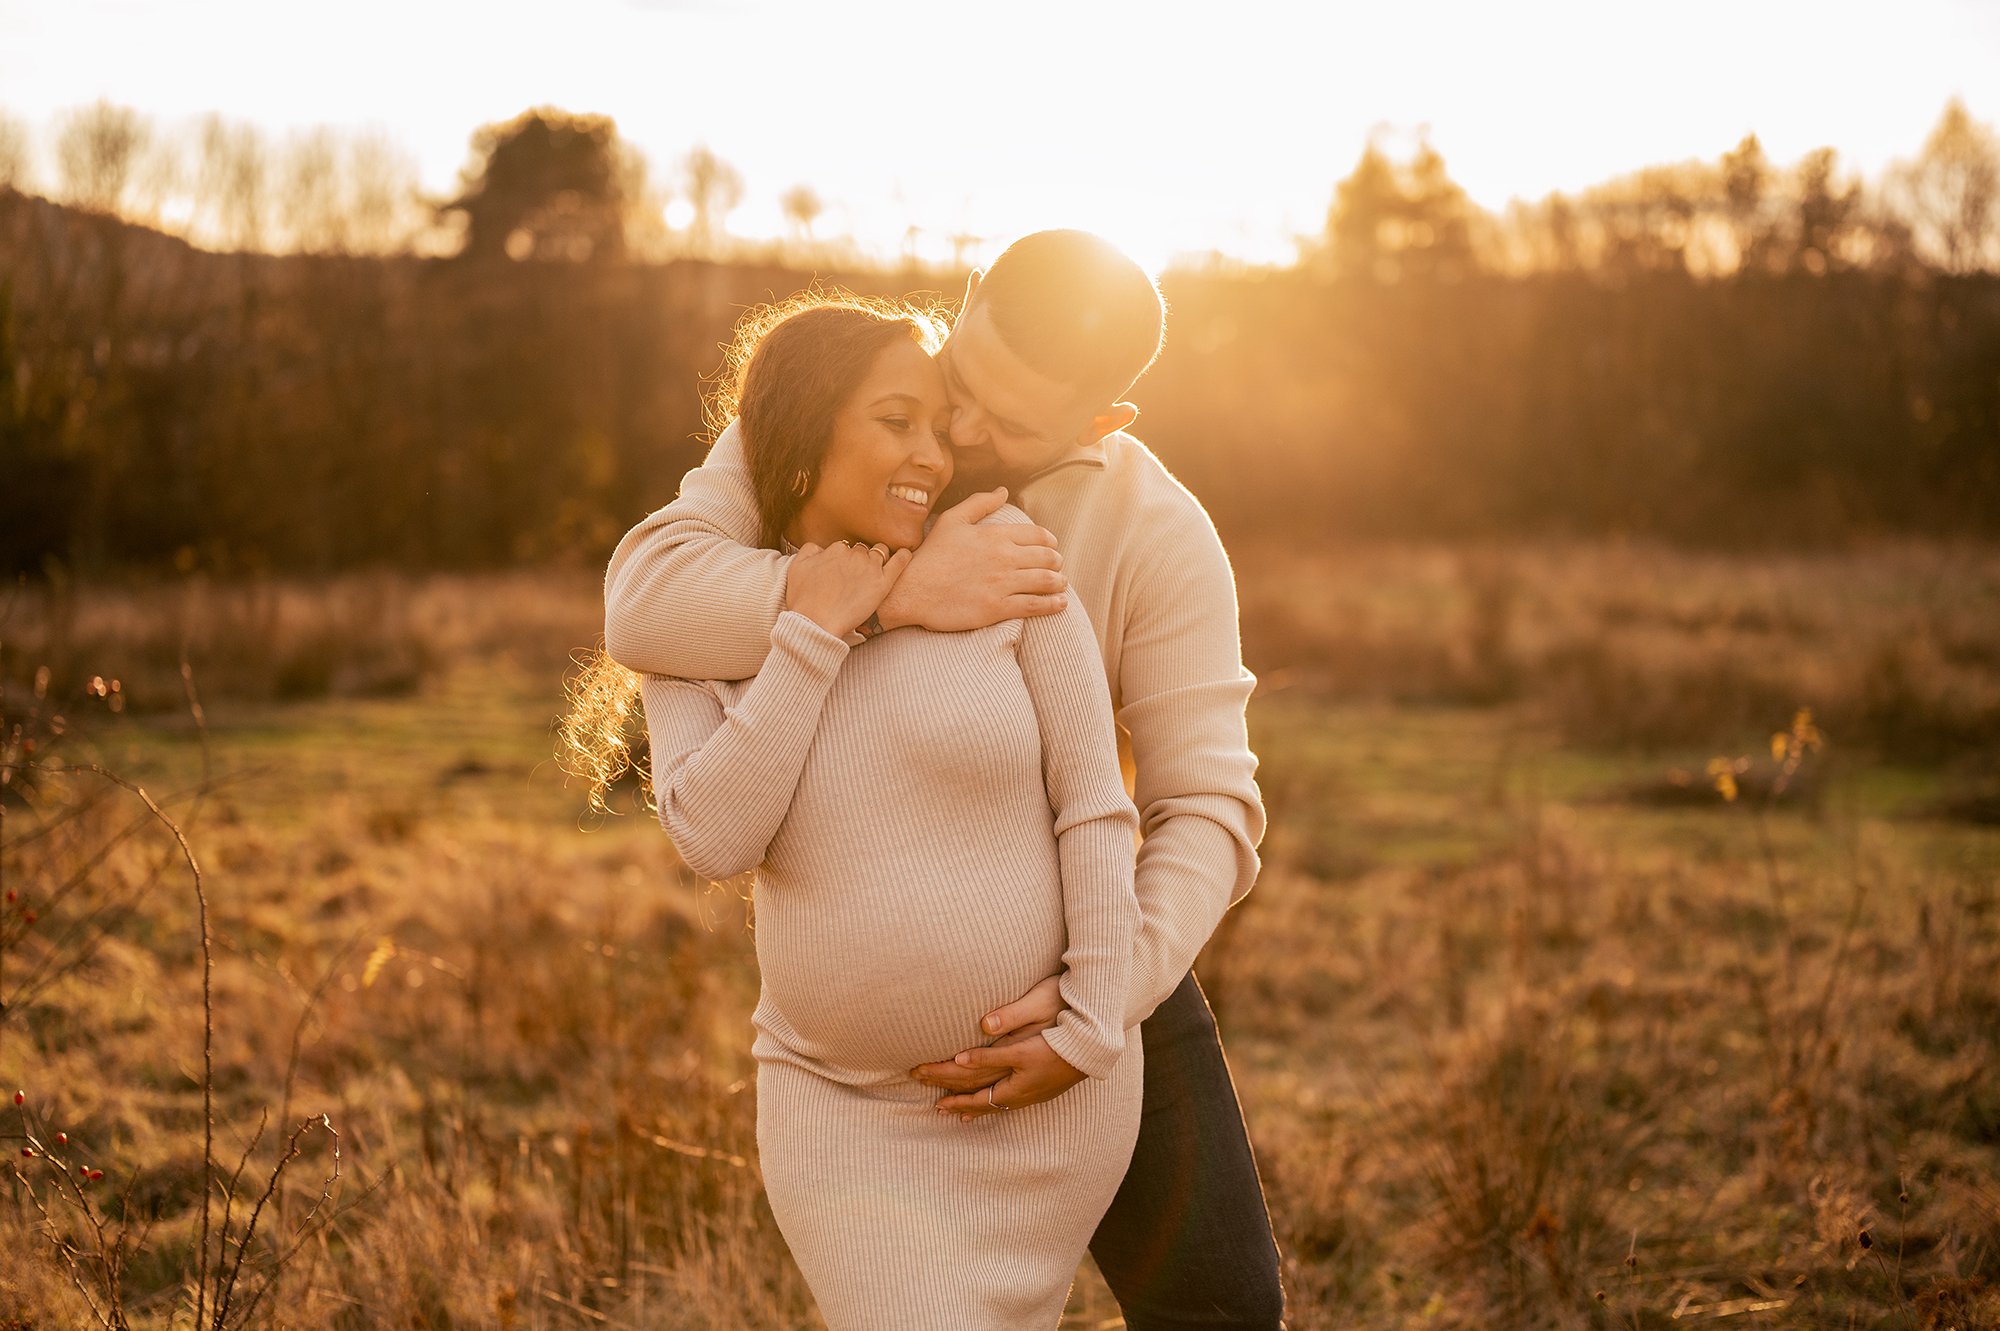 Maternity photographer Yorkshire, Barnsley - natural chic style